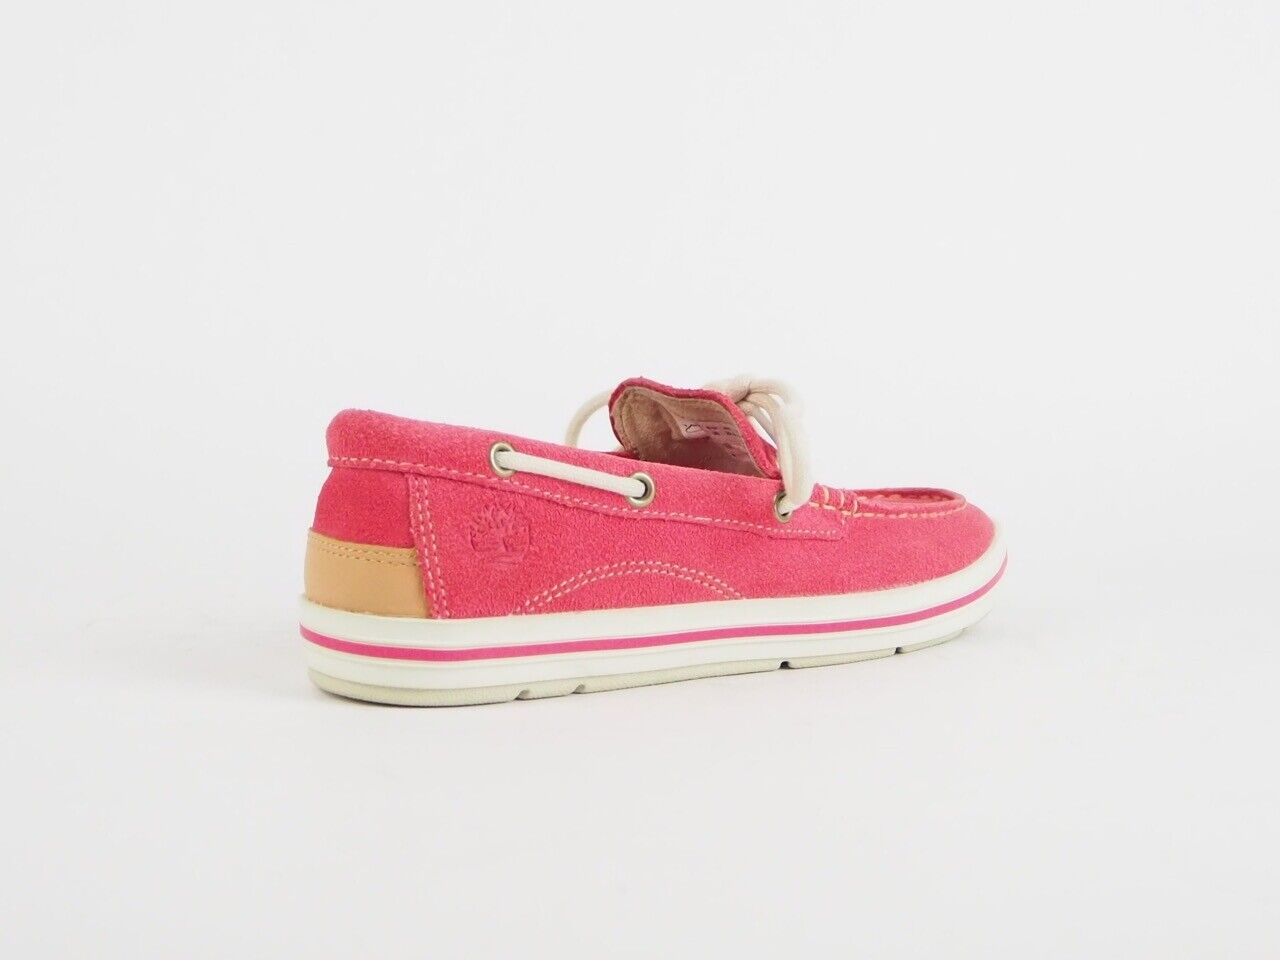 Womens Timberland Ek Casco Bay Boat 8850R Pink Leather Lace Ladies Boat Shoes - London Top Style